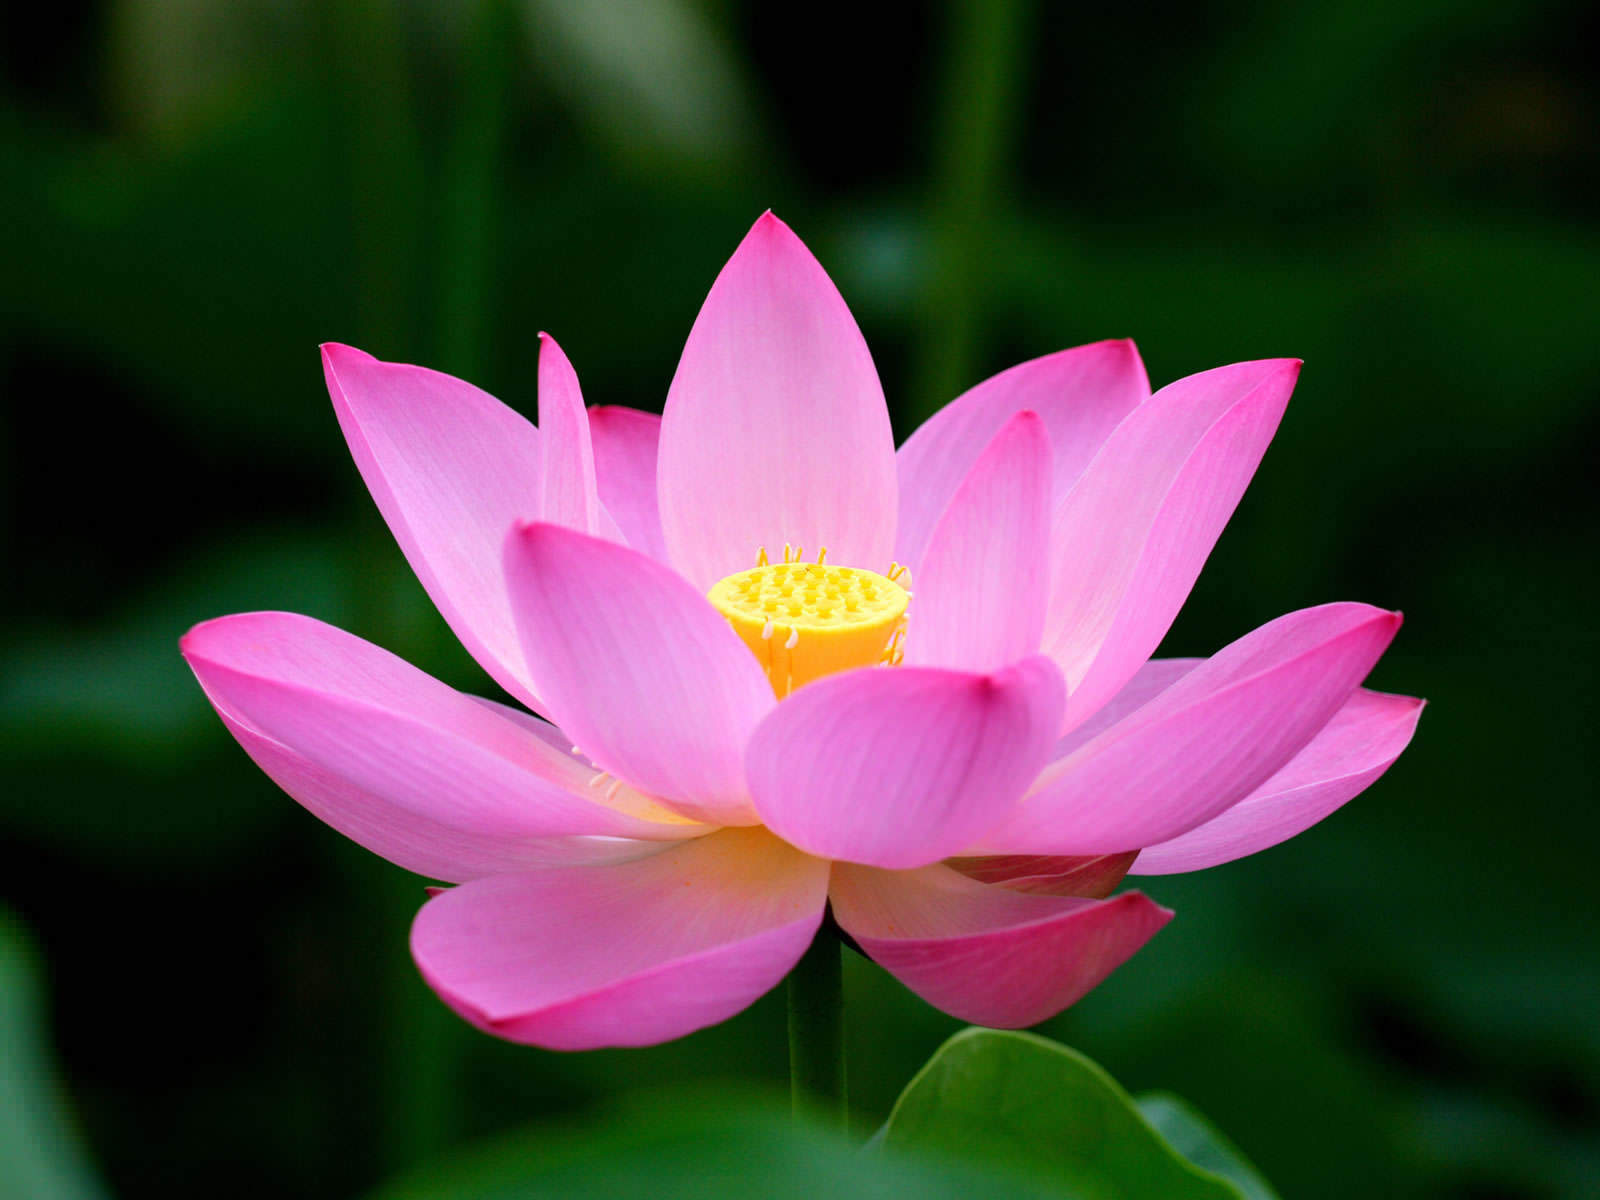 Flower Lotus Along With Other Character Desktop Wallpaper Get